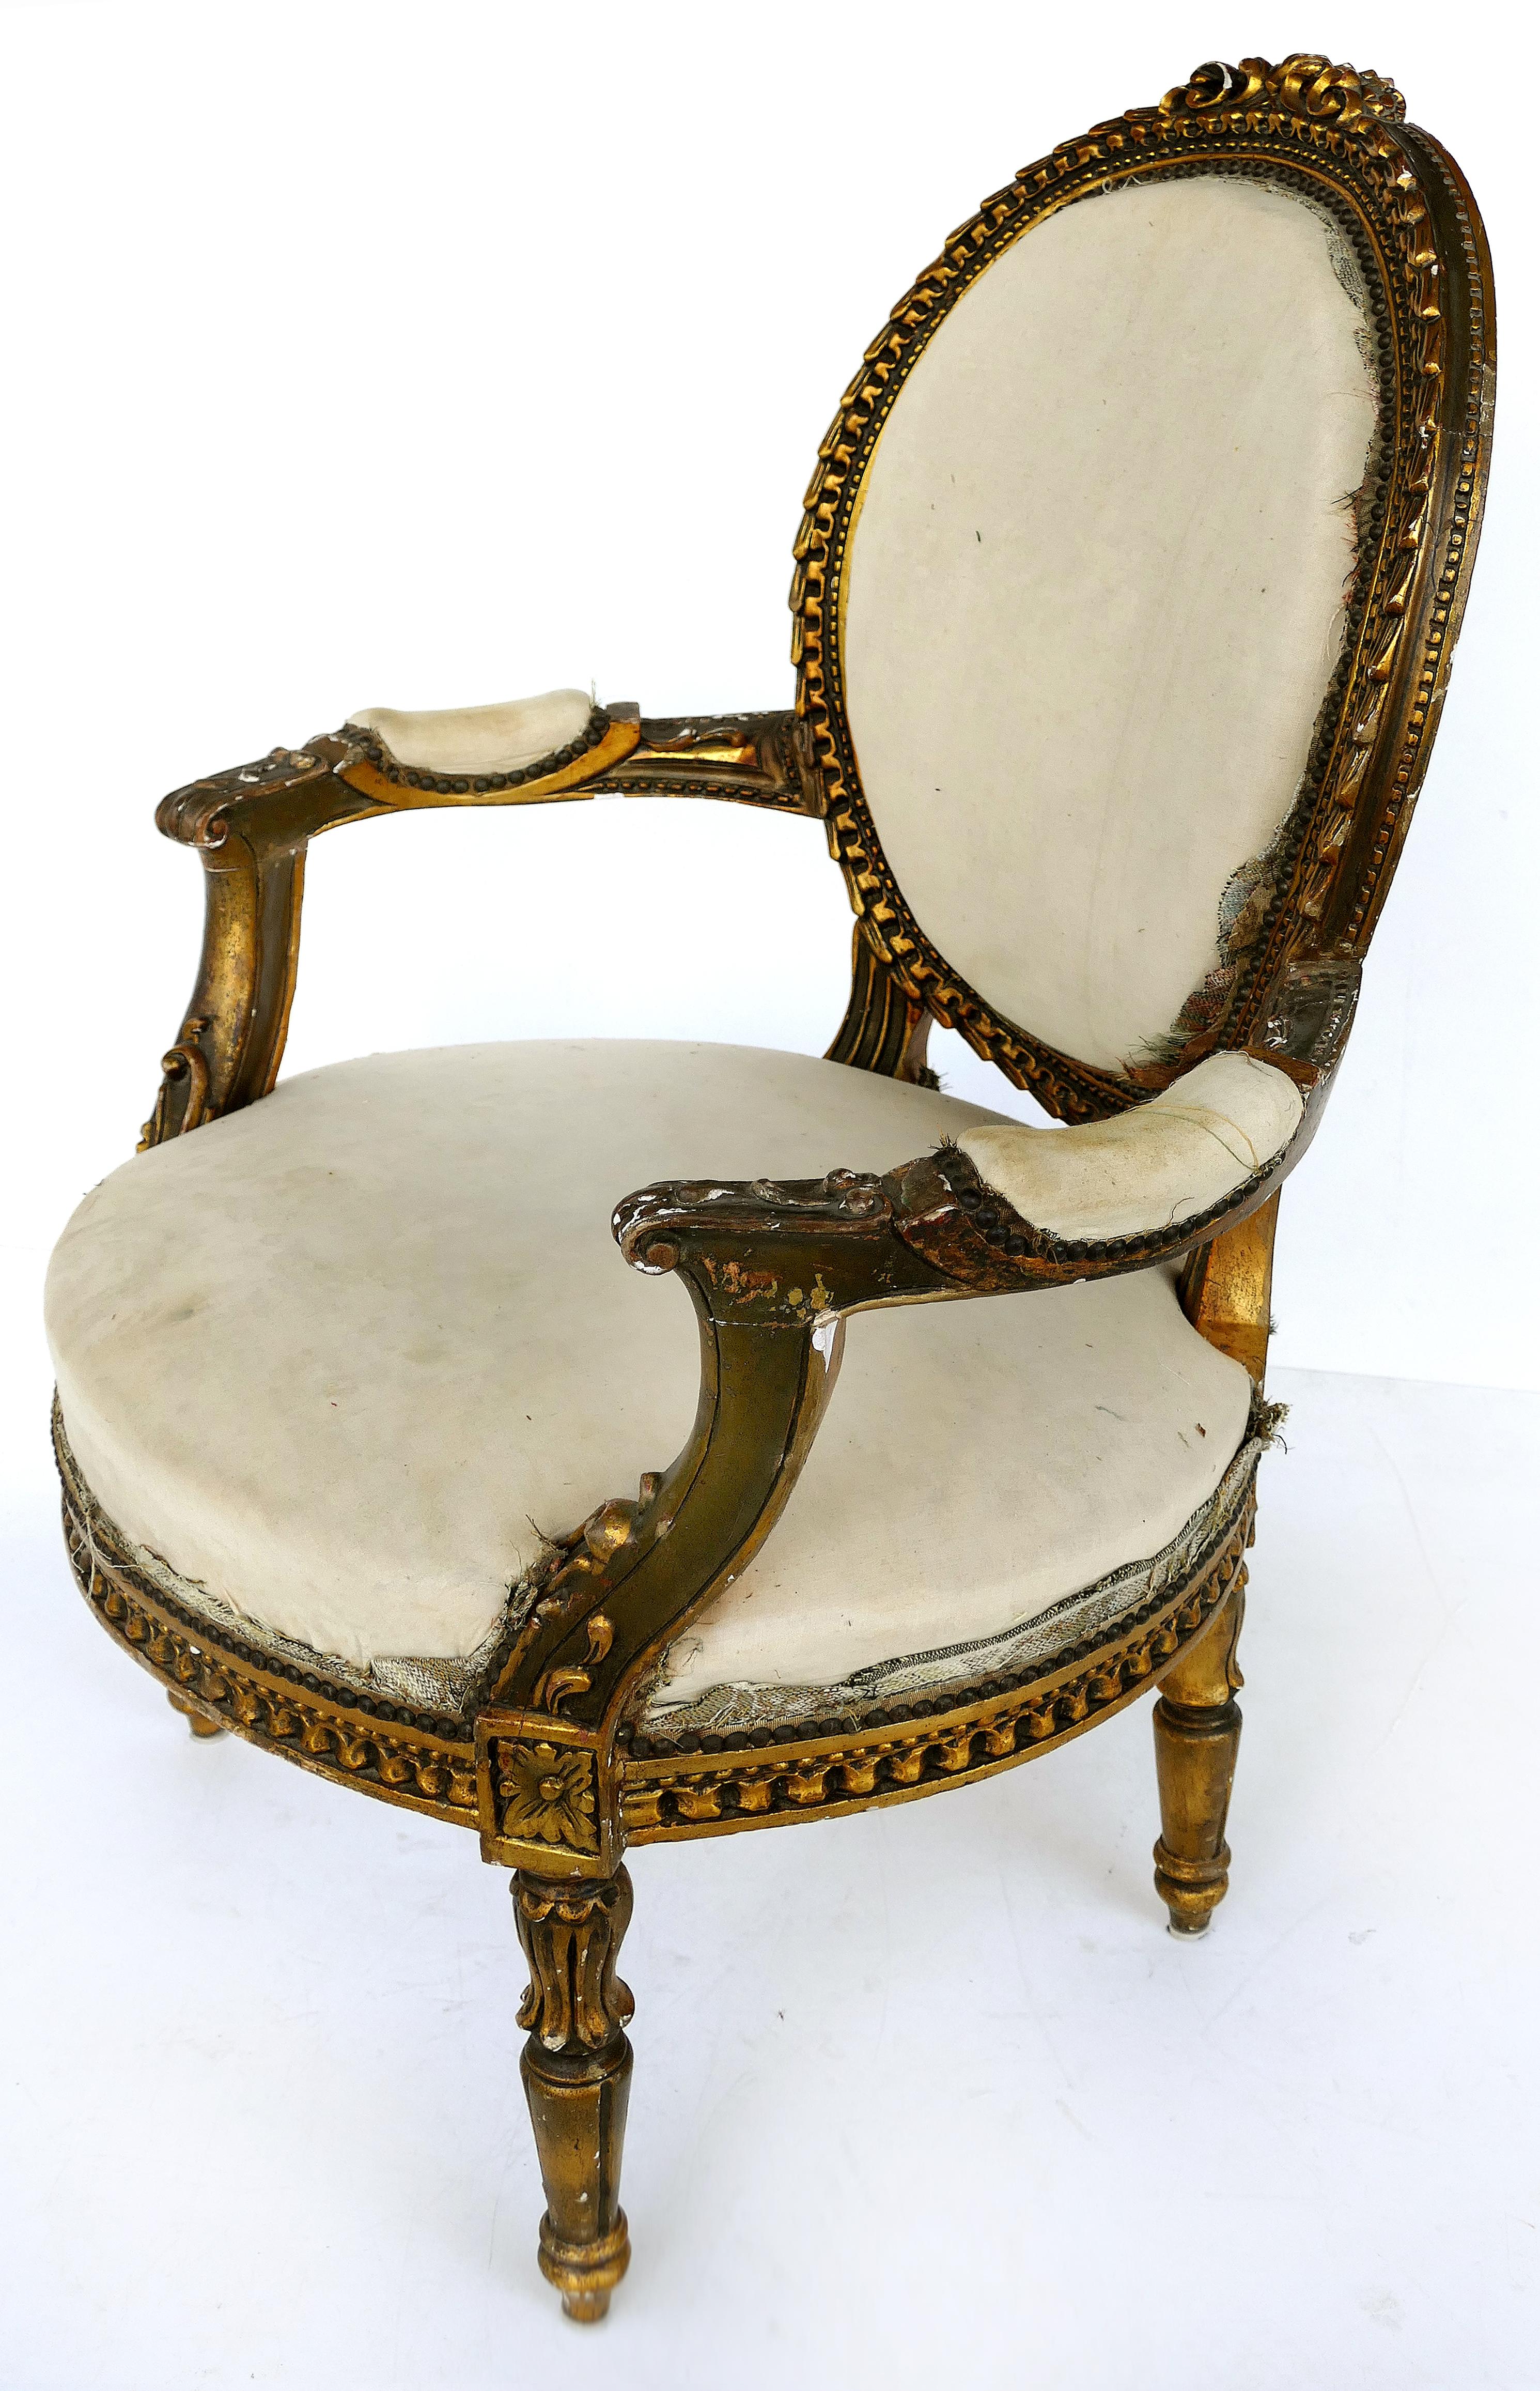 19th century French giltwood fauteuil armchairs, pair

Offered for sale is a pair of late 19th century Louis XVI French giltwood fauteuil armchairs shown in muslin and in need of upholstery. The chairs show an aged patina.

Measures: Arm, 24.5